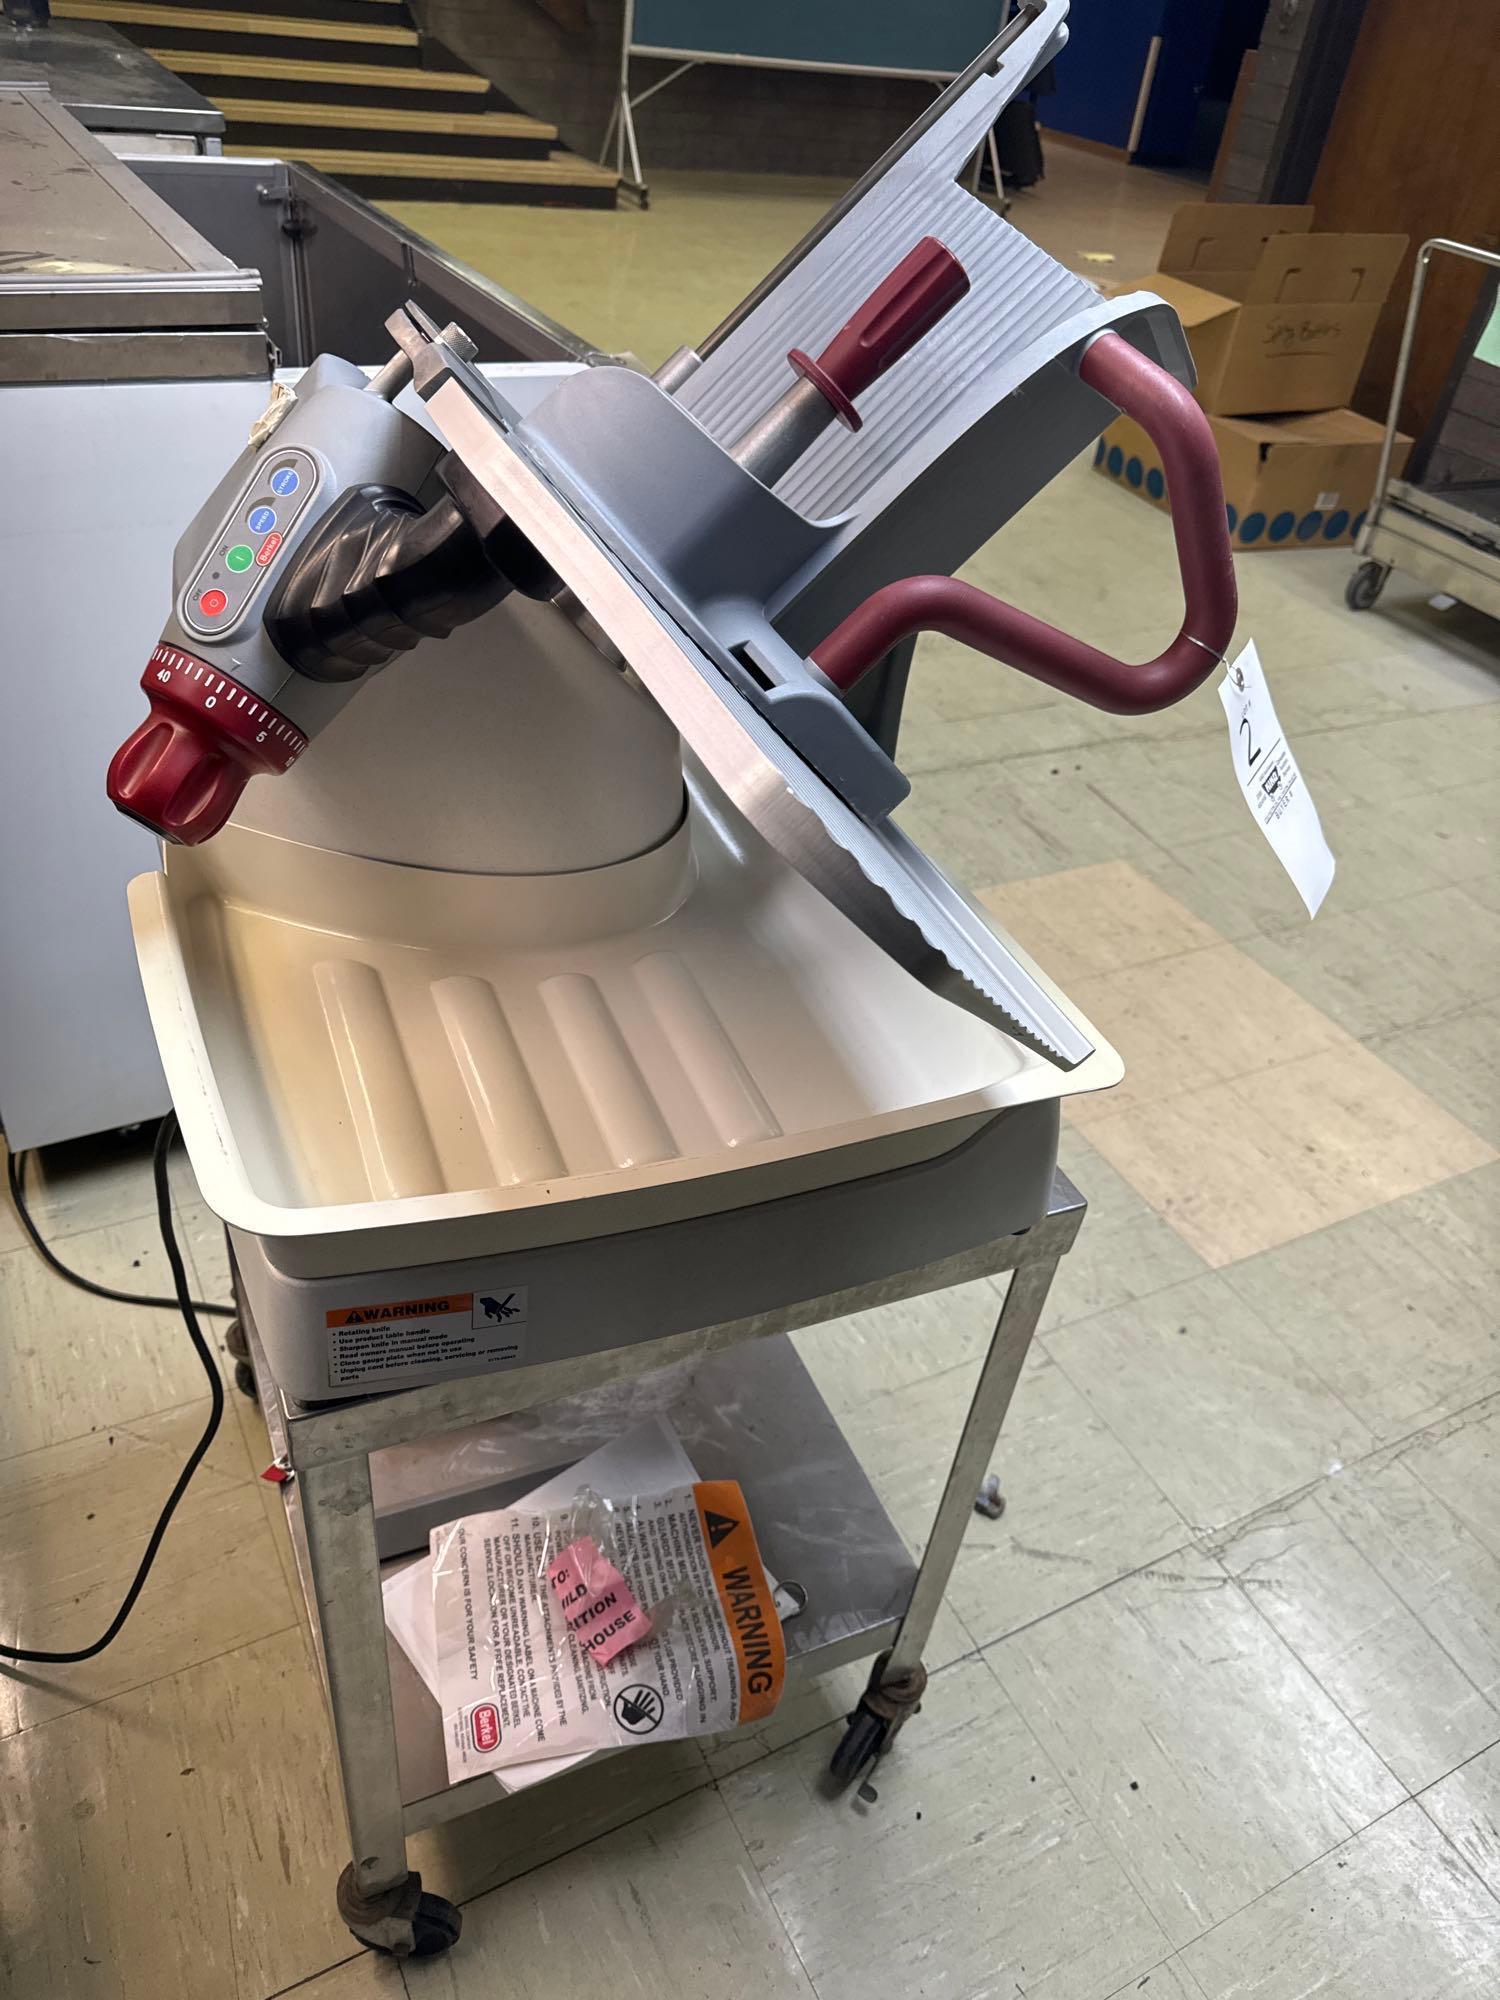 Berkel model x13A meat slicer with stainless steel cart